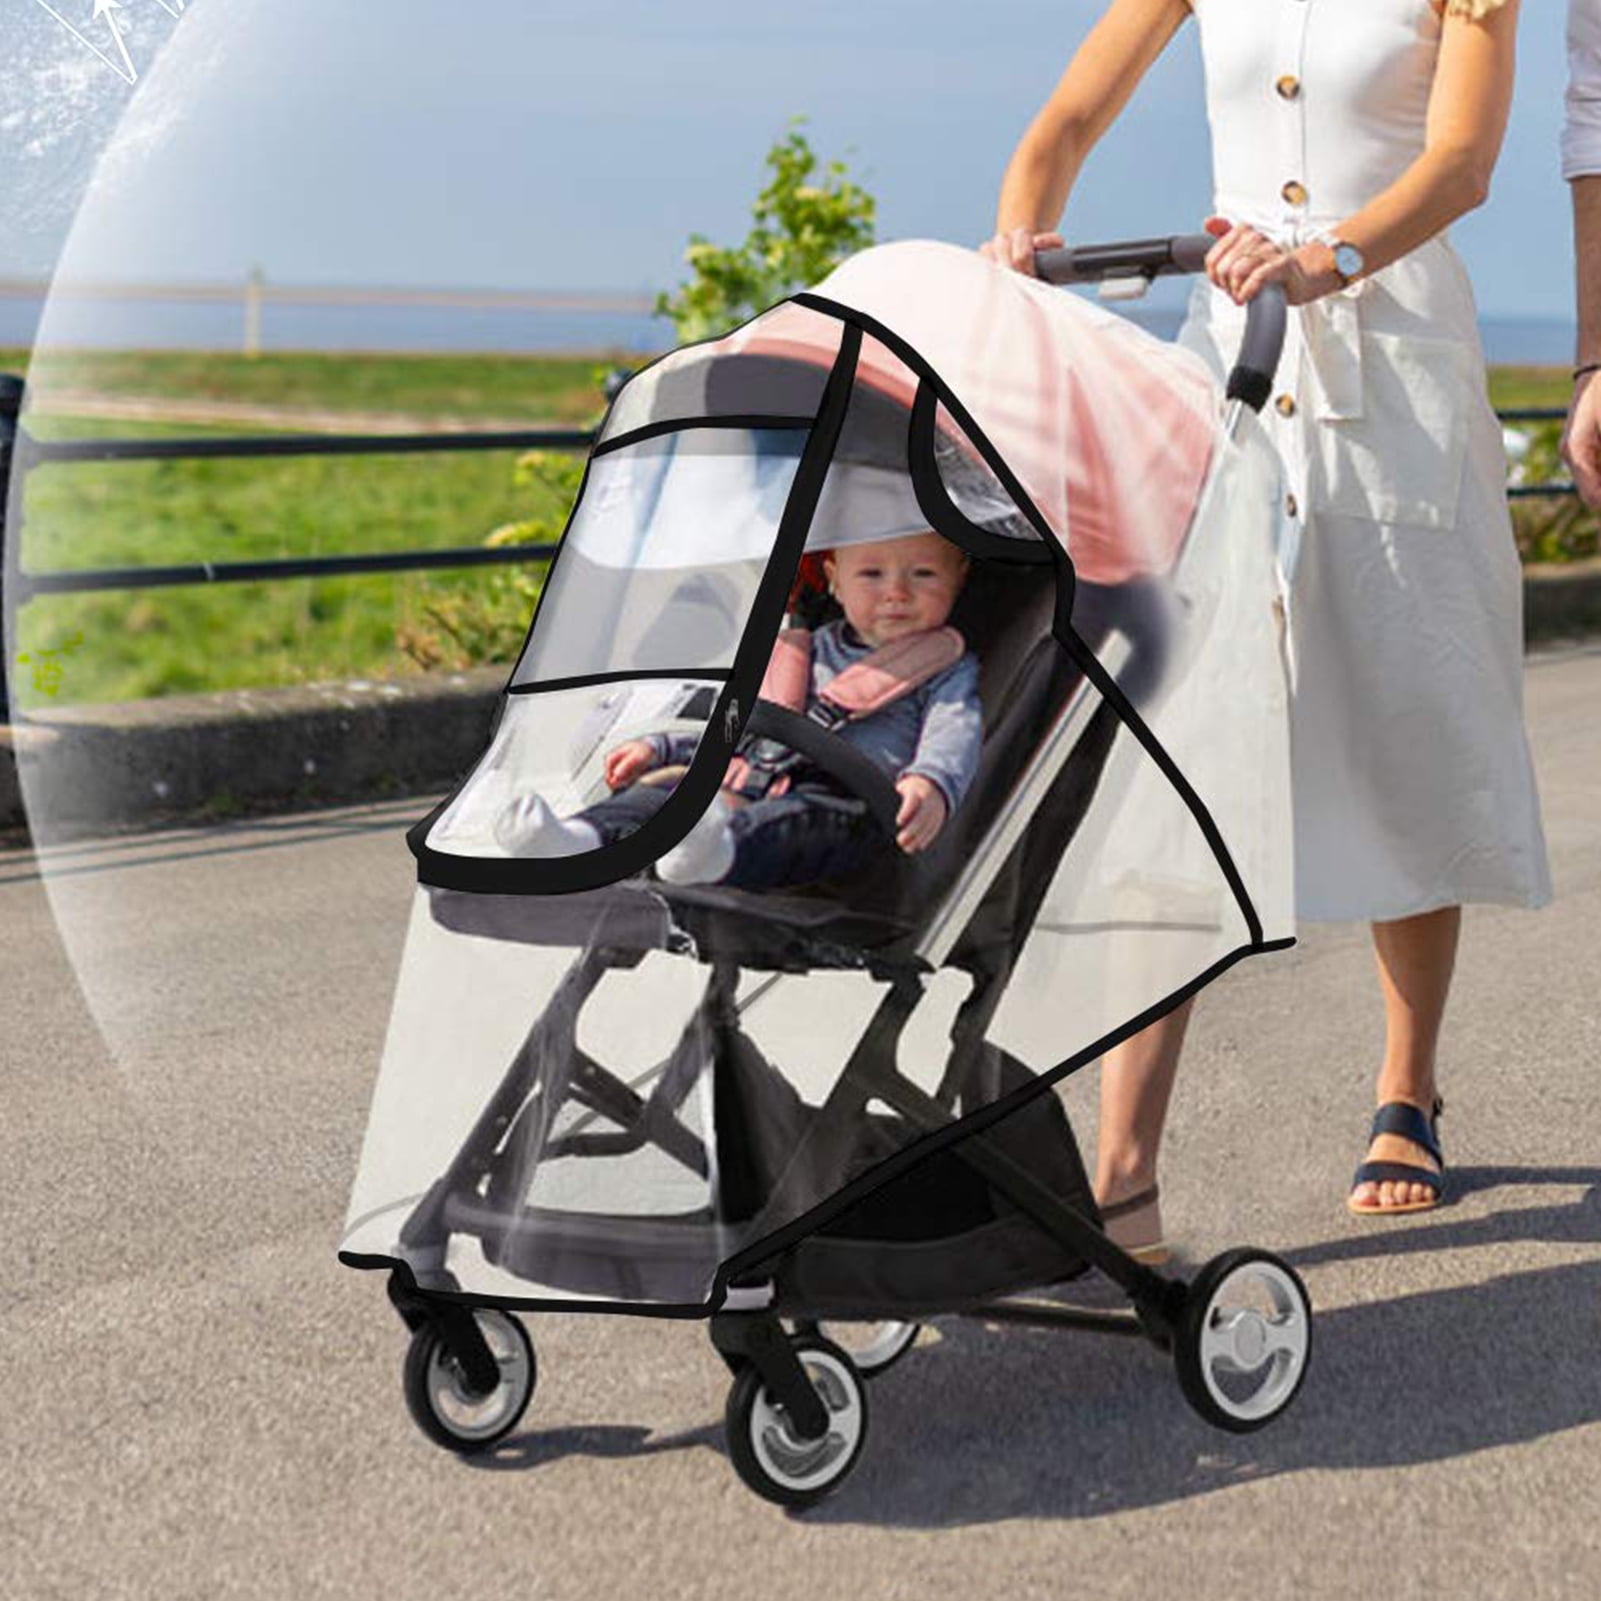 Easy to Install and Remove Outdoor Use Windproof Protection Travel-Friendly Black Wonder buggy Universal Stroller Weather Shield Rain Cover with Bubble,Waterproof 